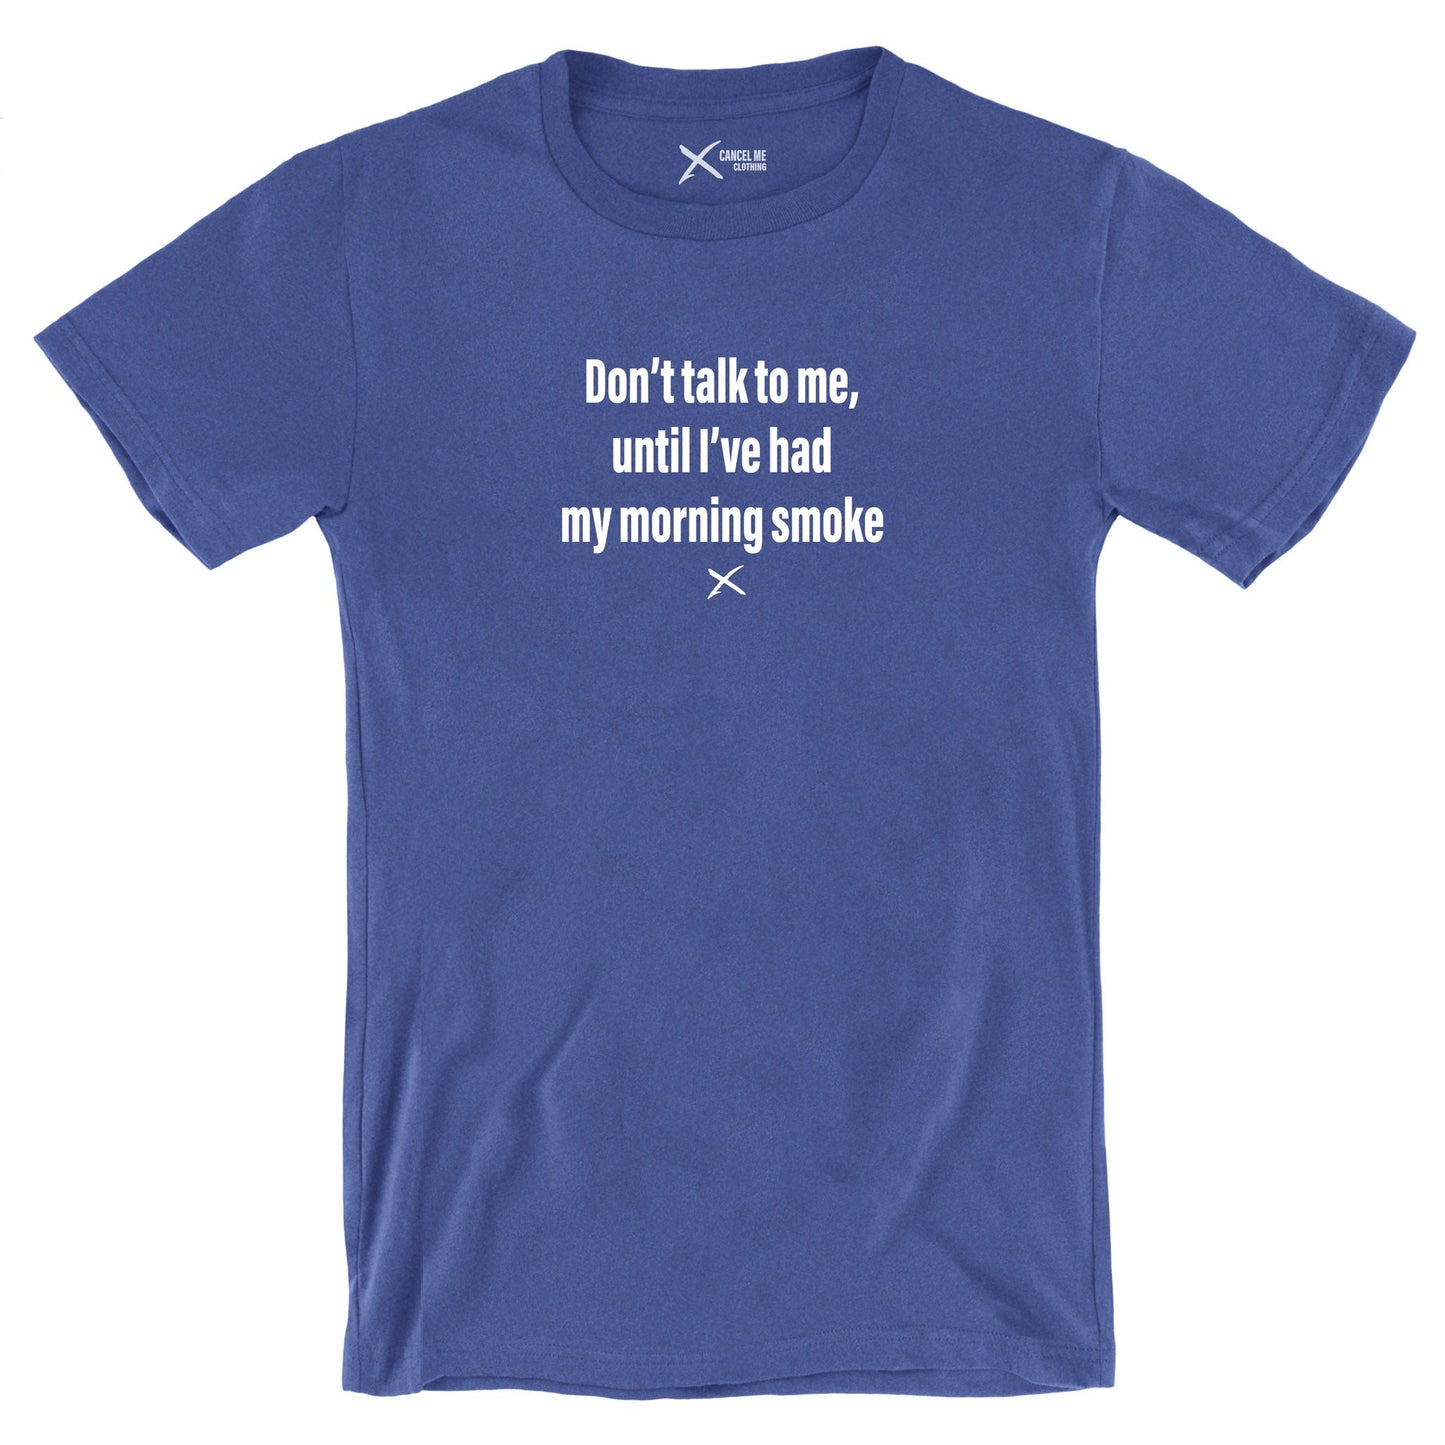 Don't talk to me, until I've had my morning smoke - Shirt